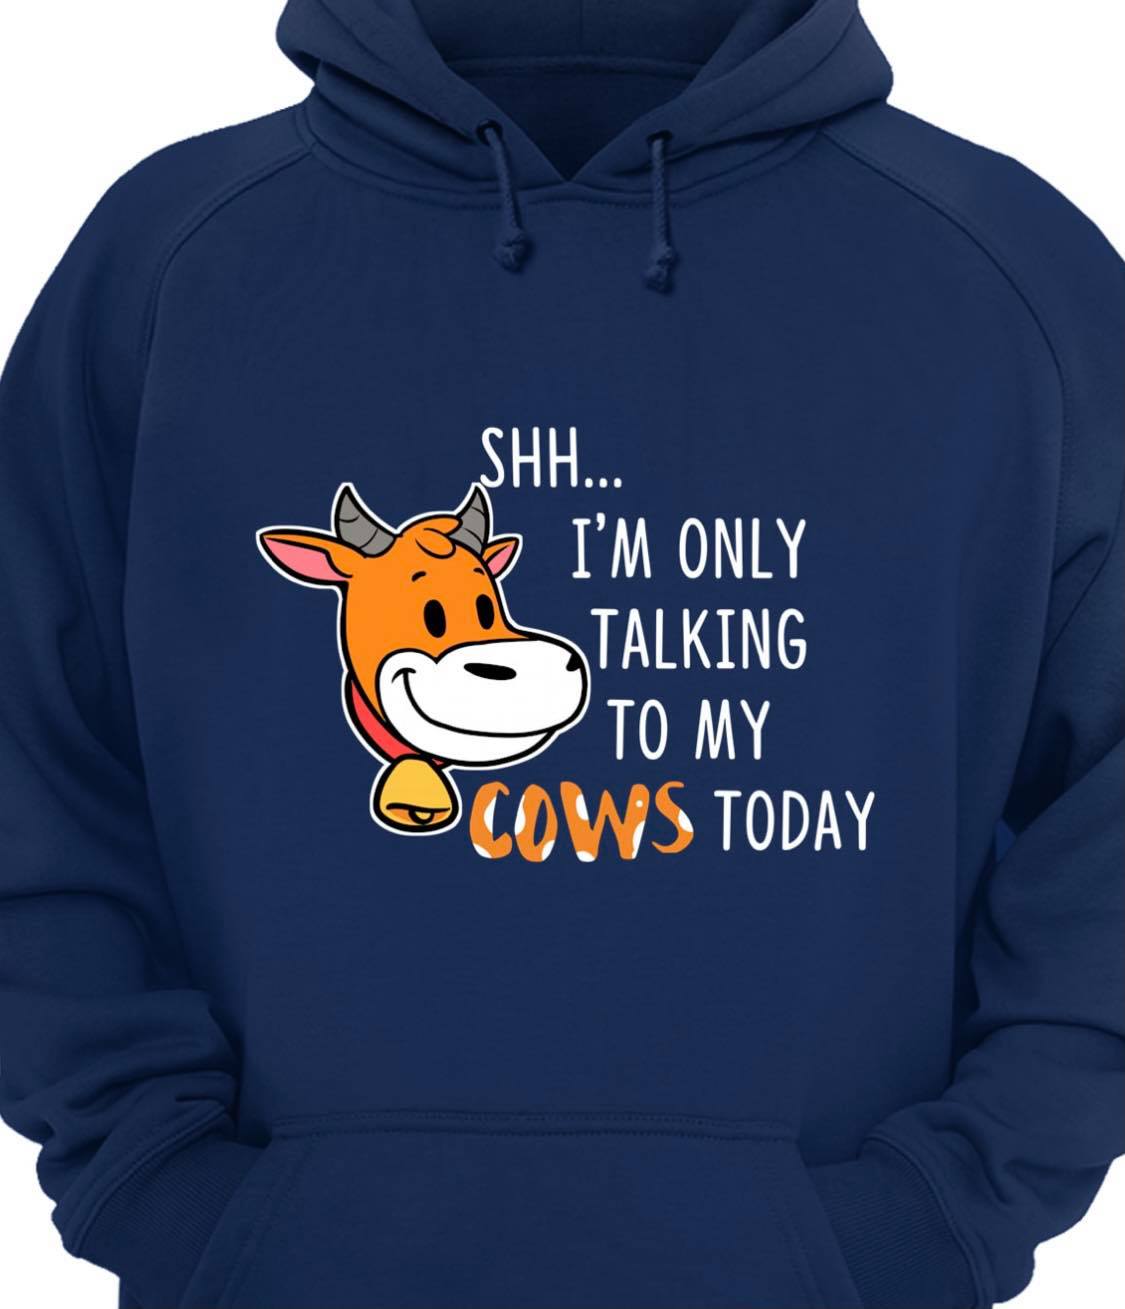 Shh I'm only talking to my cows today - Cow lover